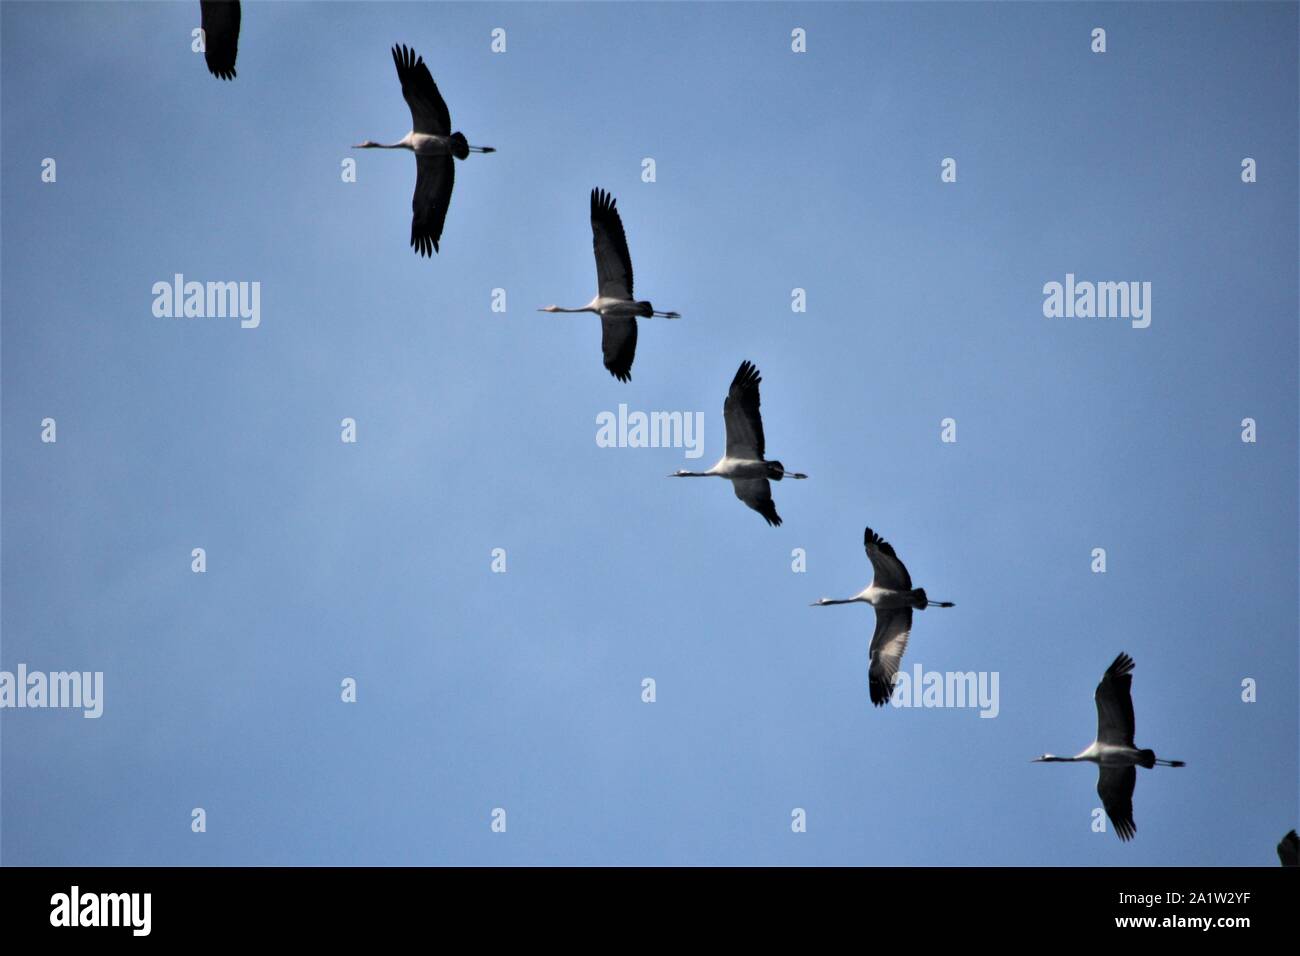 Migrating Cranes (Grus grus) flying in shifted positions in the sky above Recklinghausen, Germany Stock Photo